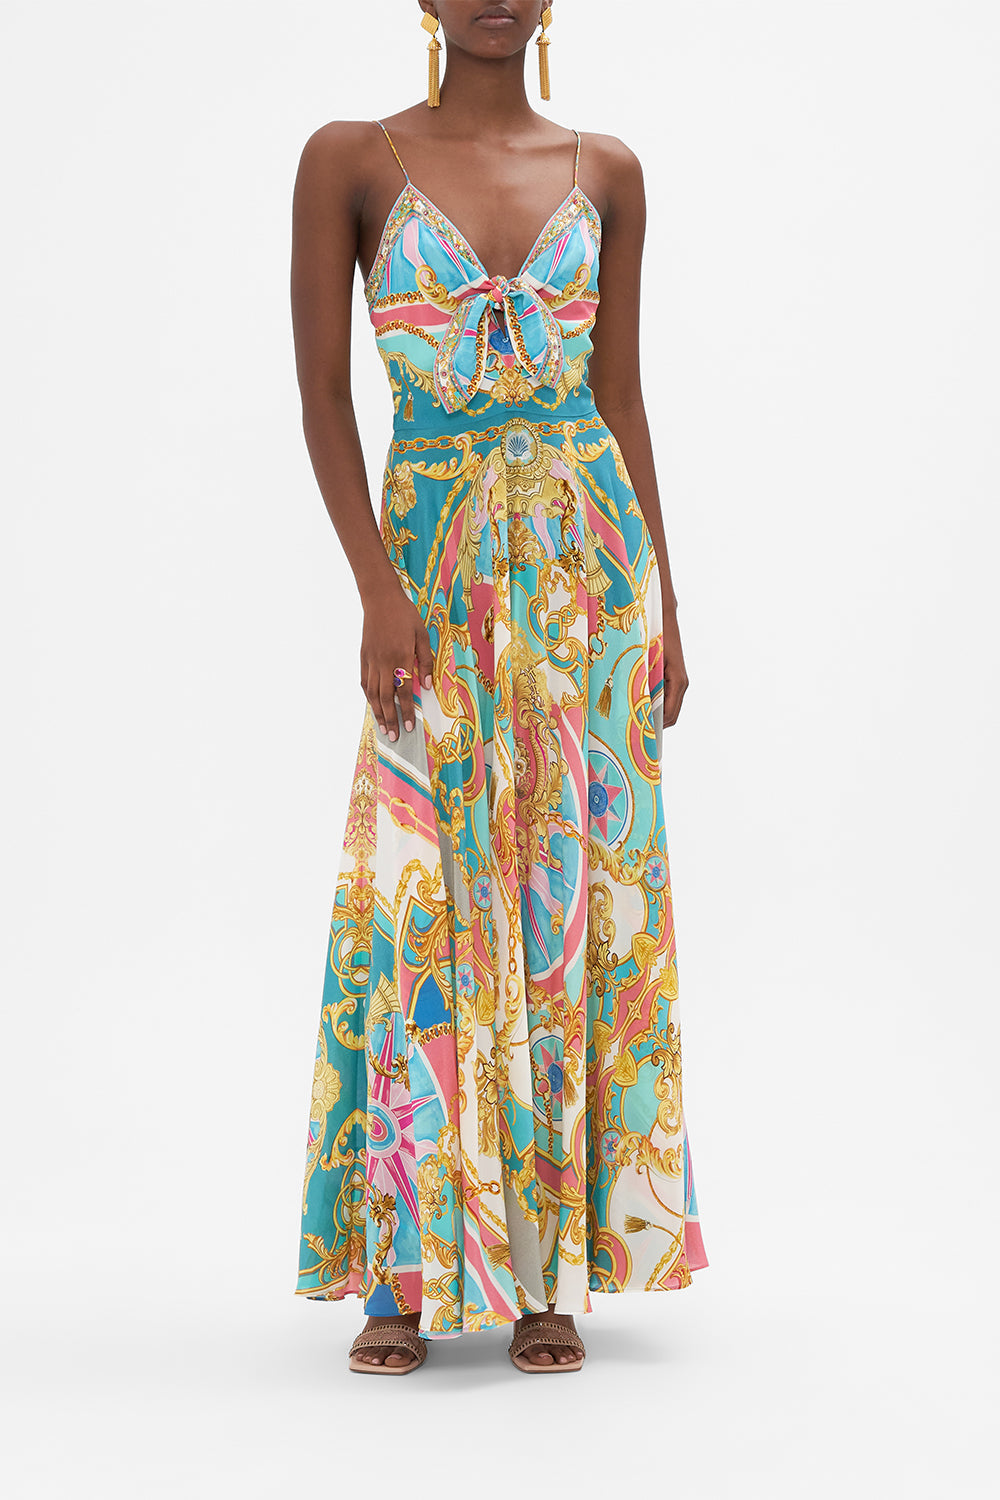 Front view of model wearing CAMILLA maxi dress in Sail Away With Me print